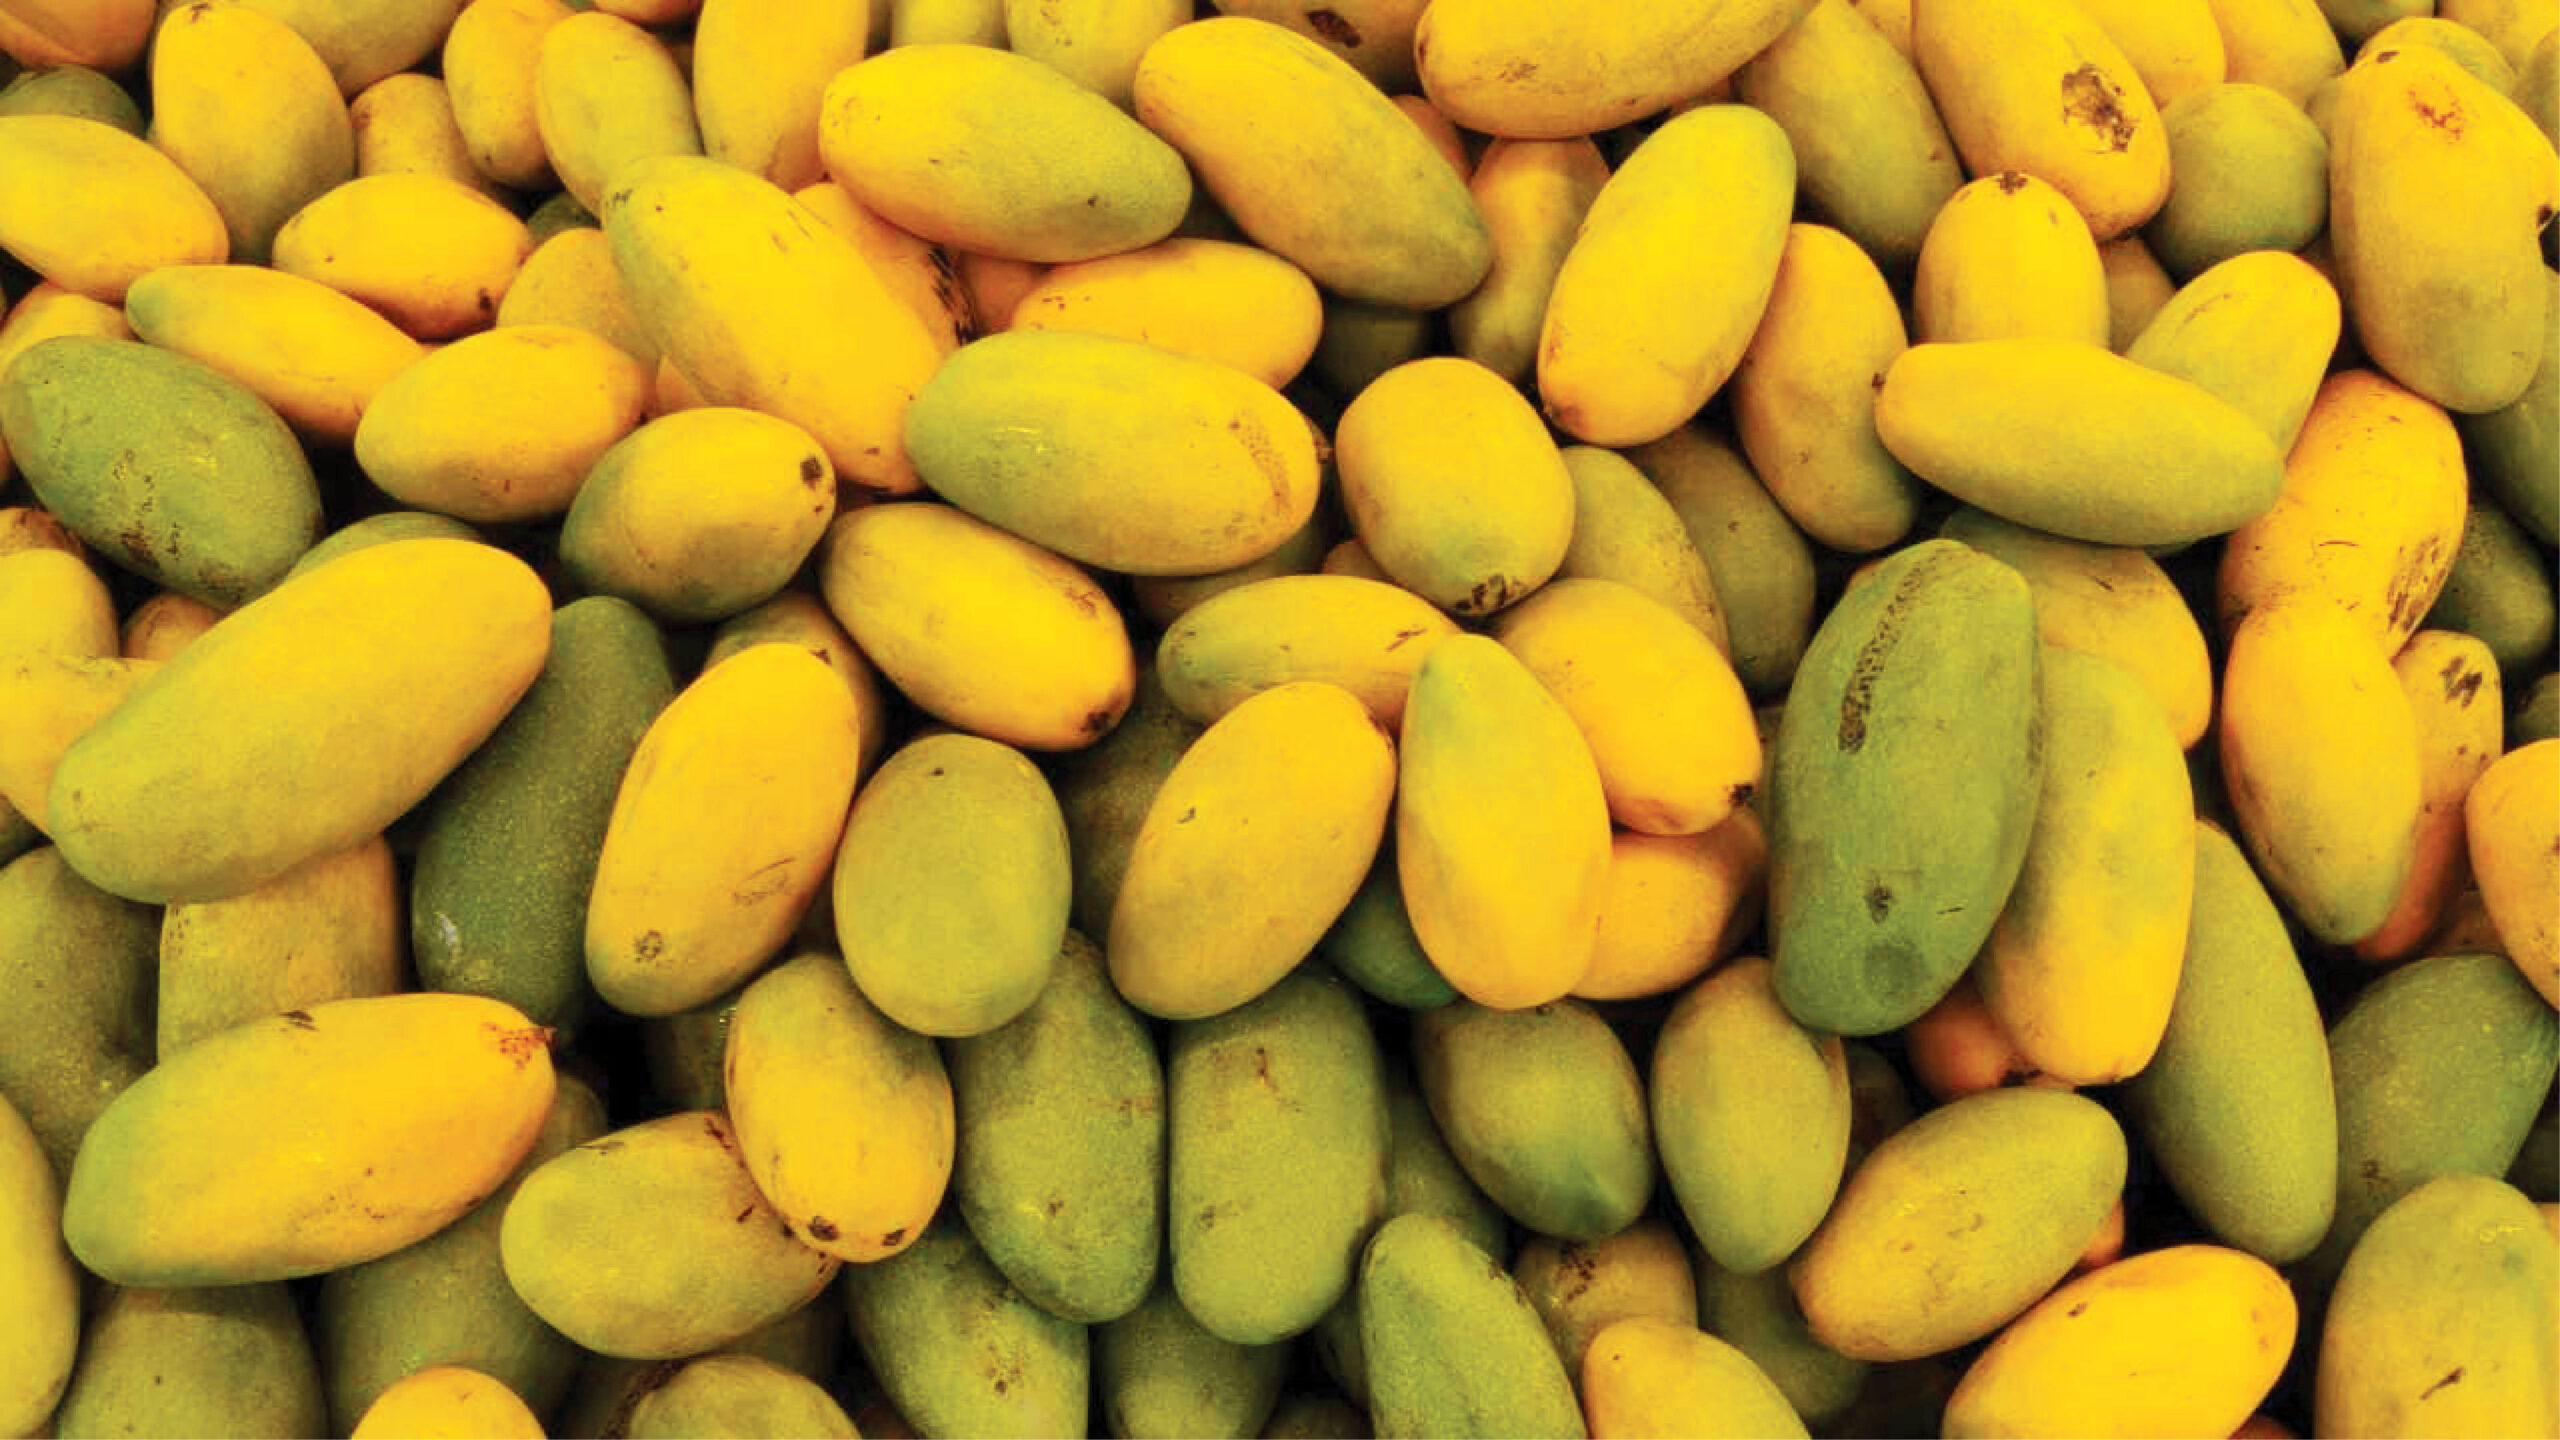 Mangoes from UP will be sold in US, Japan markets